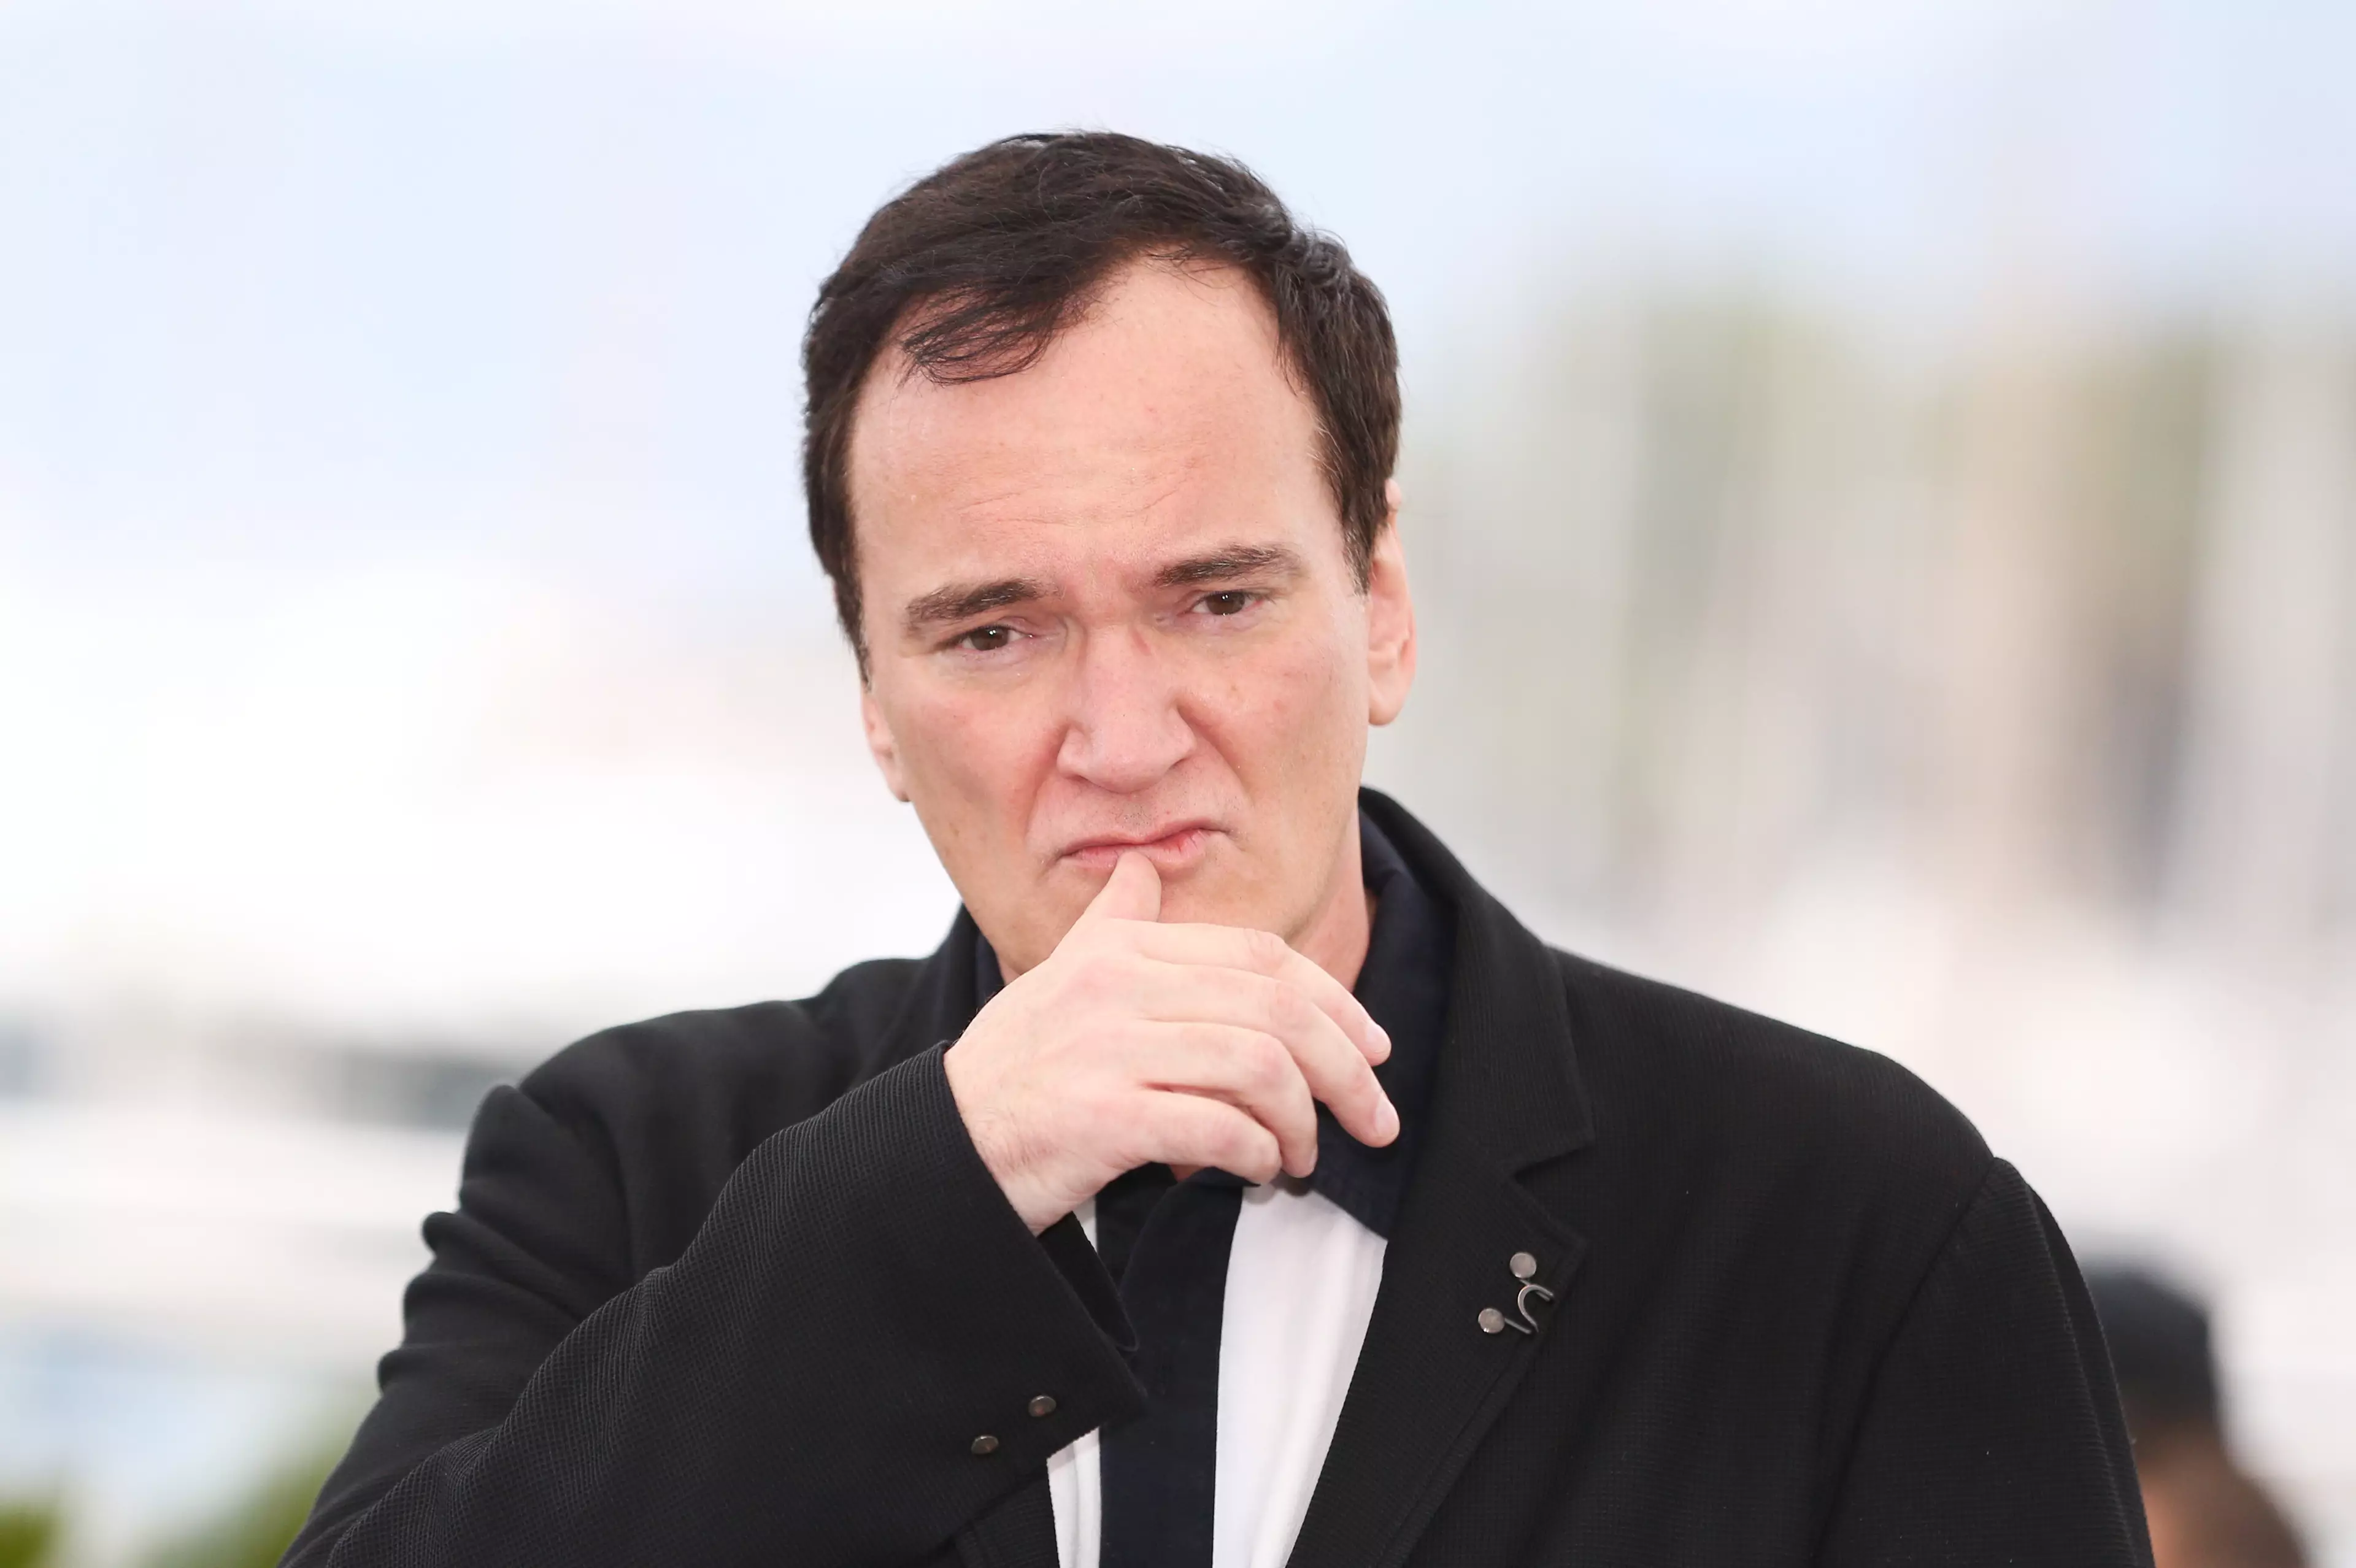 Tarantino at Cannes Film Festival earlier this year.